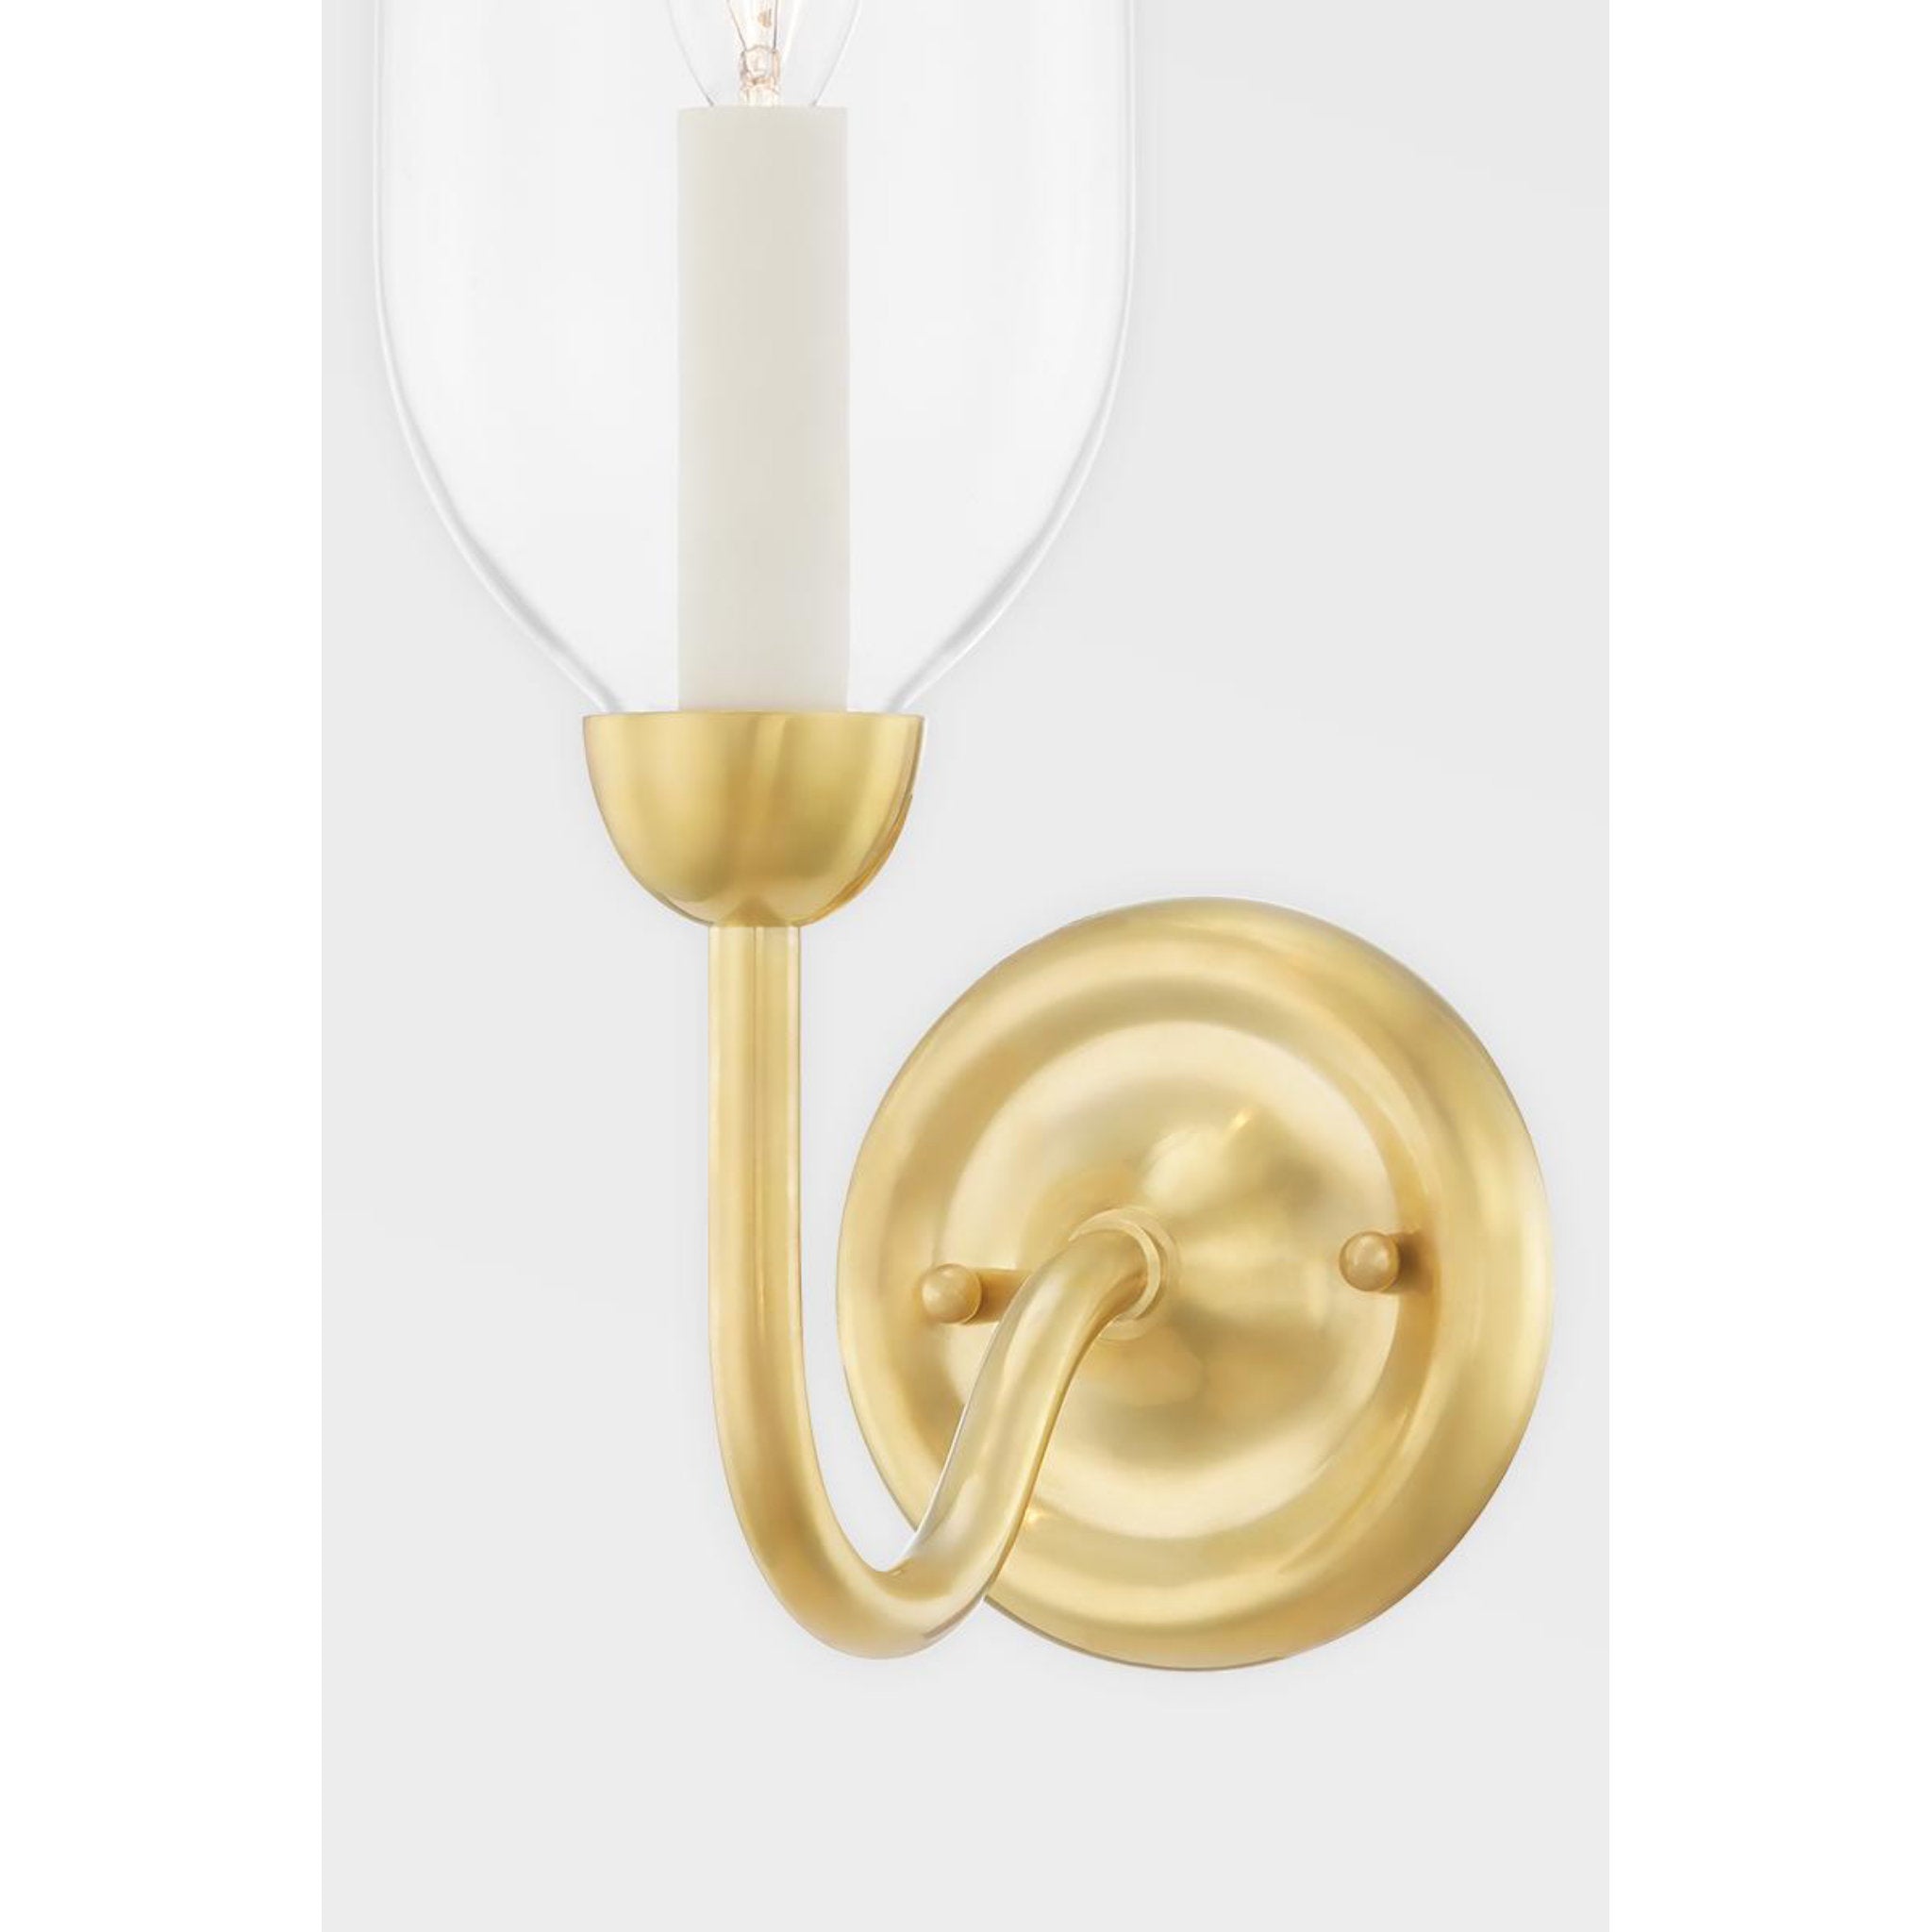 Classic No.1 2 Light Wall Sconce in Polished Nickel by Mark D. Sikes